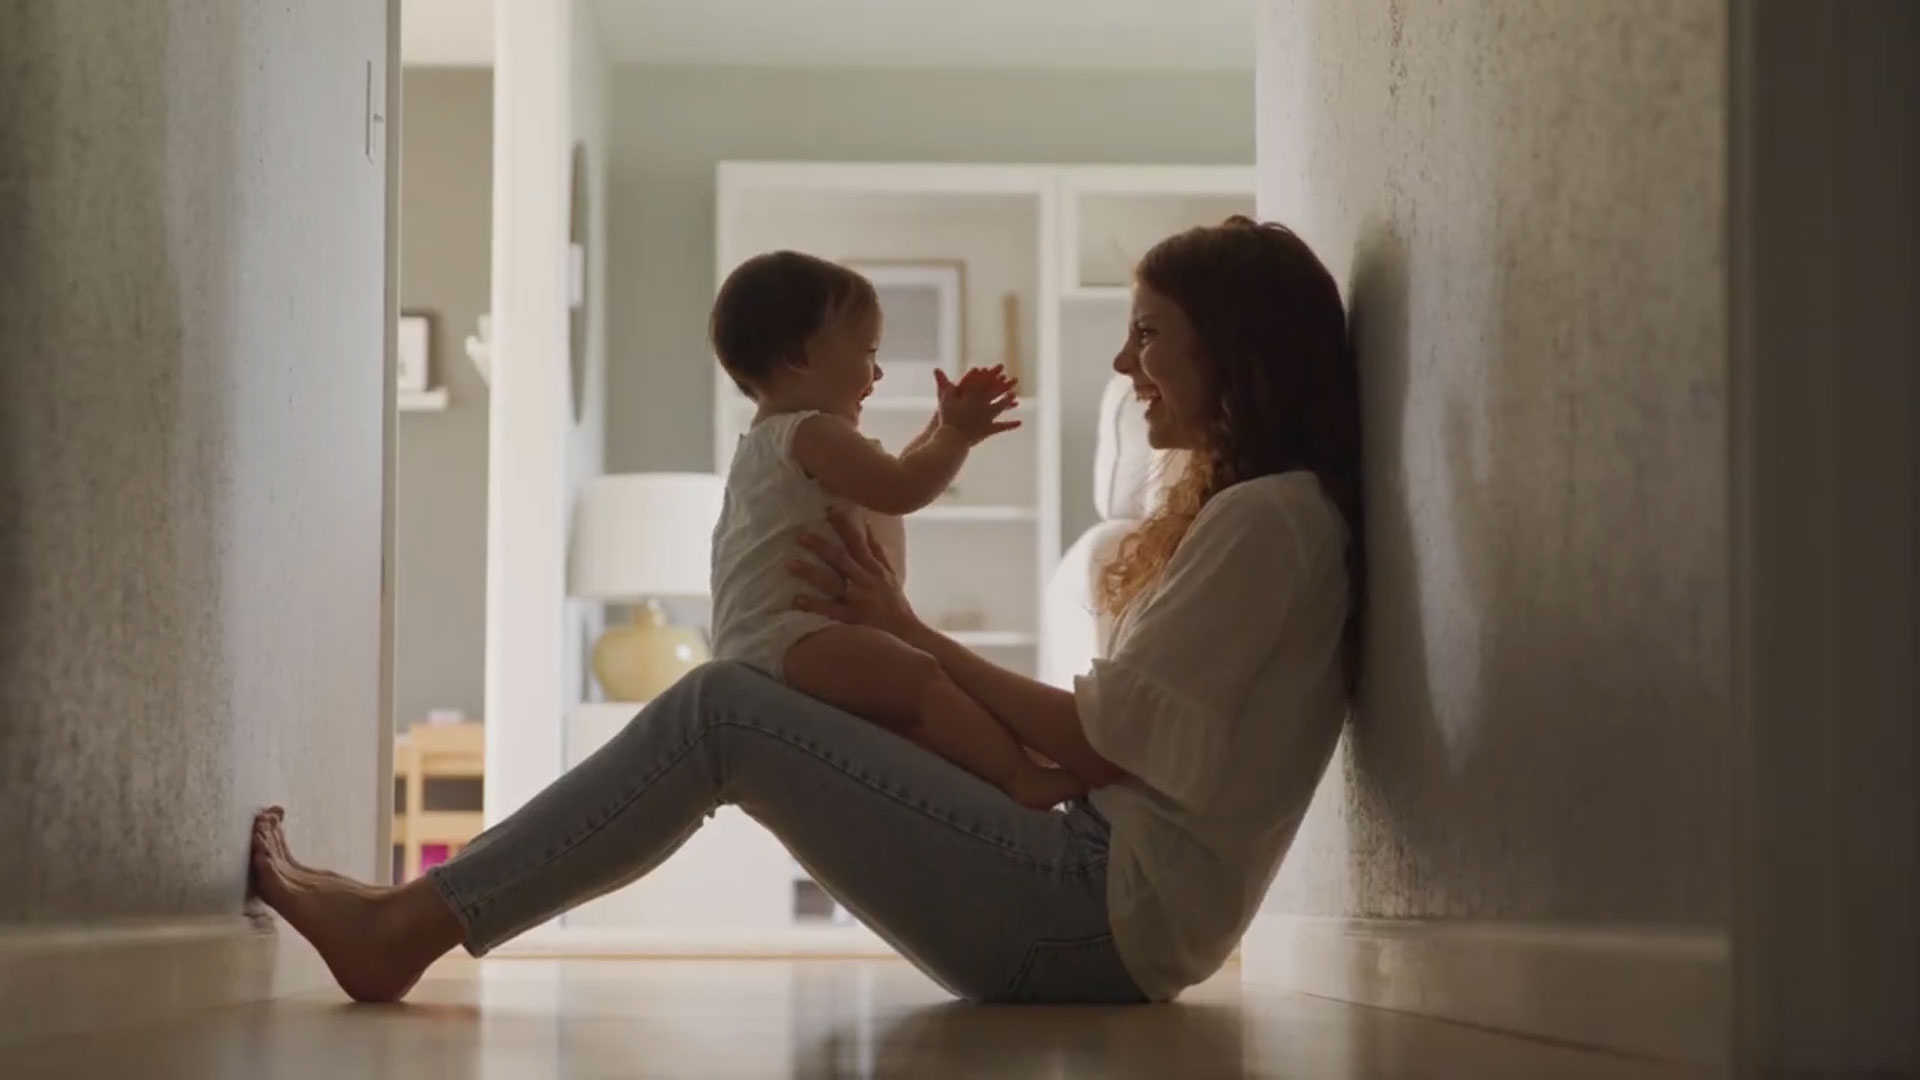 Hologic Launches ‘Better Is Possible’ Health Awareness Campaign for Women